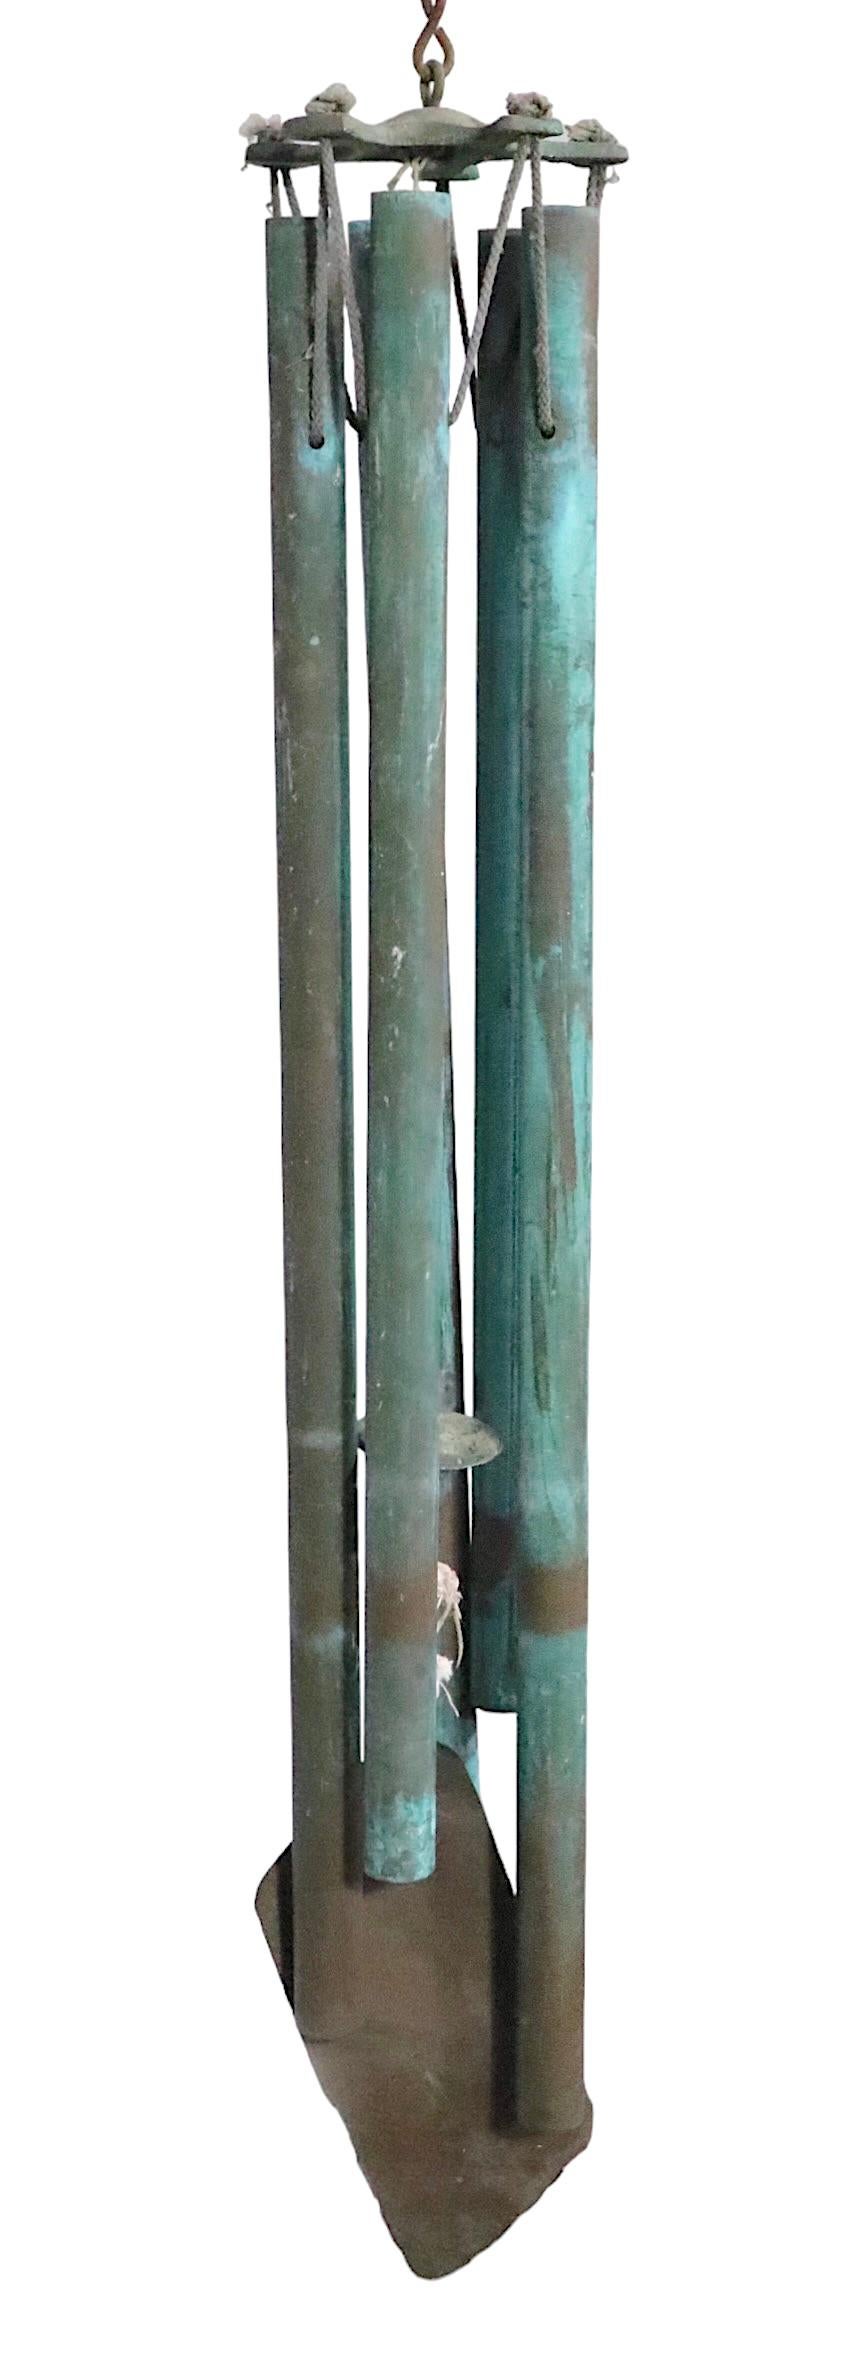 Brutalist Verdigris bronze wind chimes from the 1970's. This intriguing chime features five hanging pipes of various lengths, which create a calming tone when the wind blows. Perfect Mid Century, Brutalist style addition to your meditative outdoor